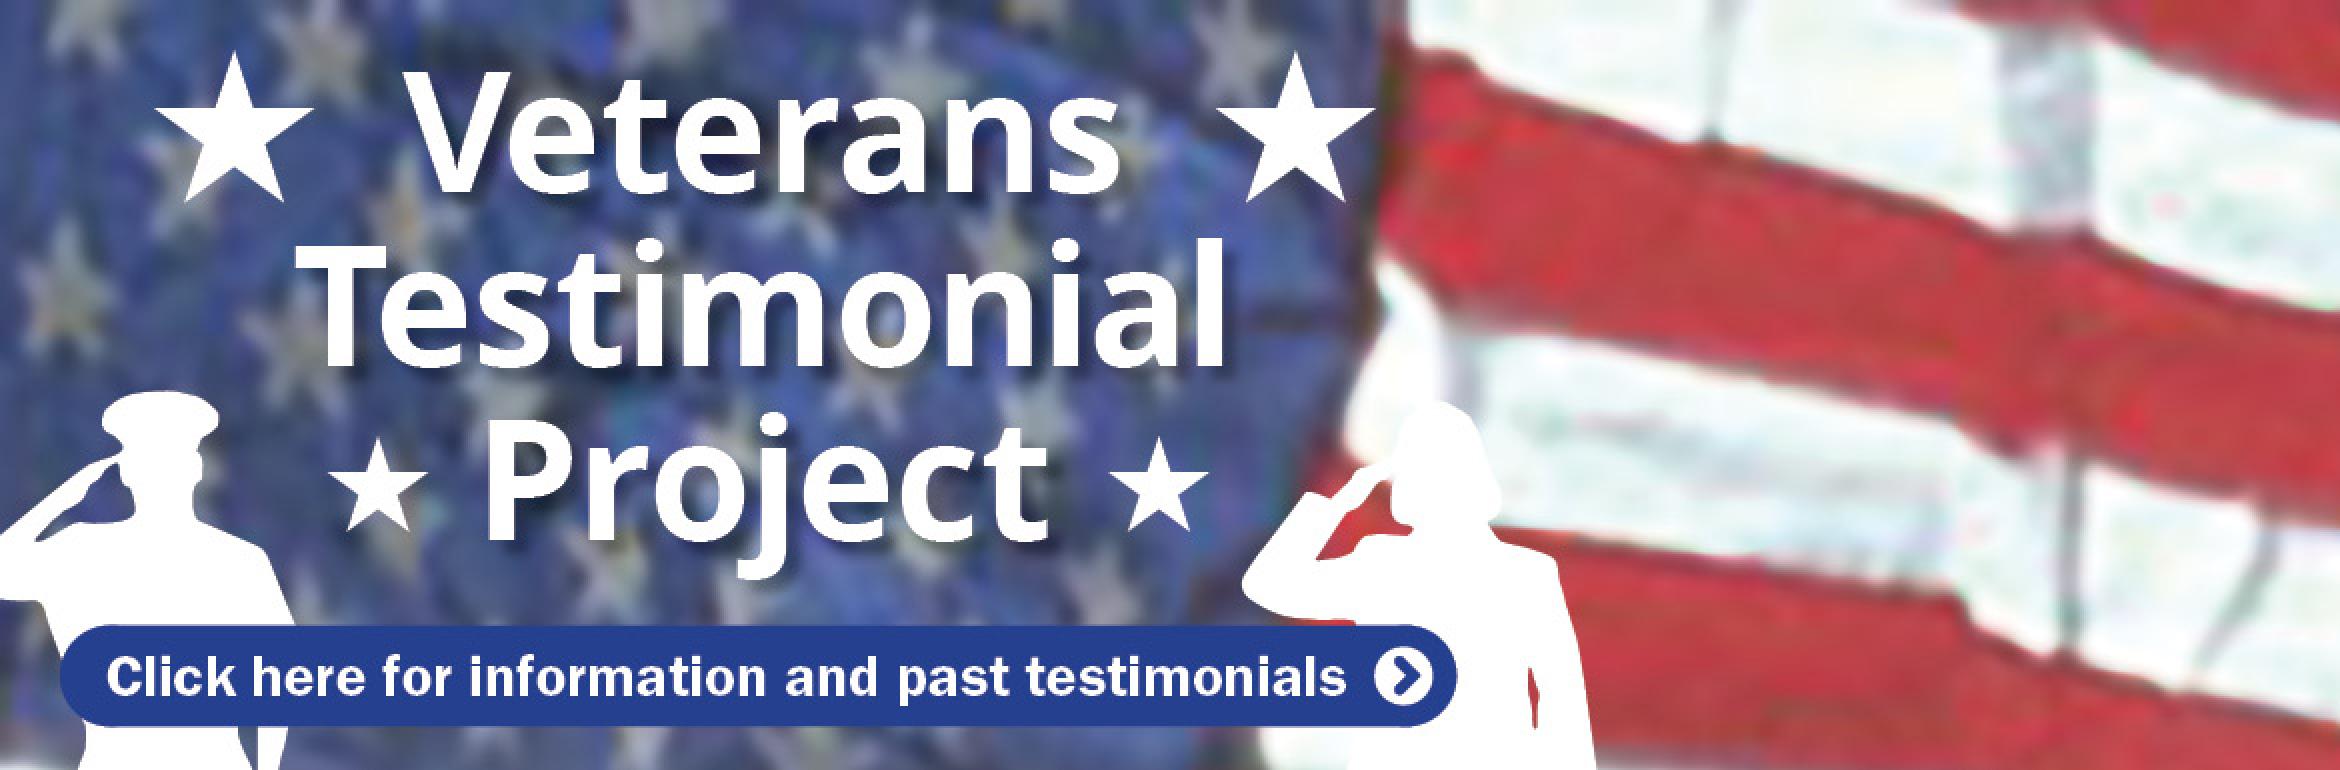 Veterans Testimonial Project. Click here for information and past testimonials.